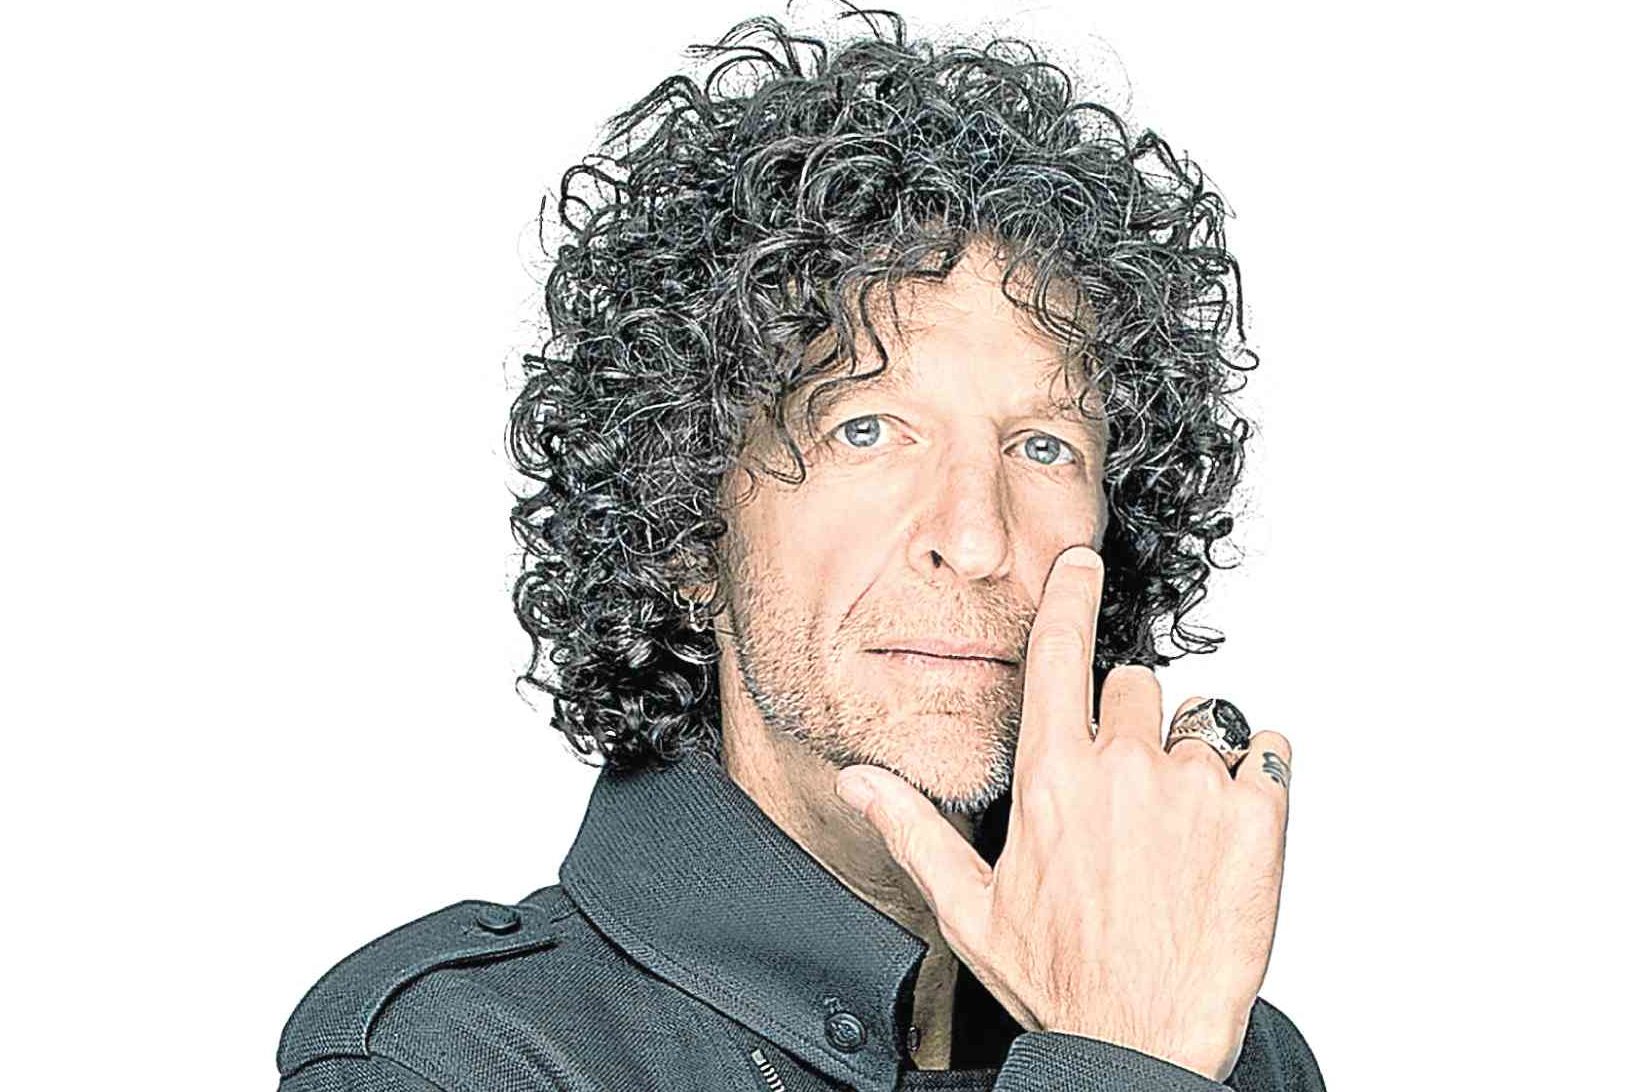 Howard Stern shows growth in book of interviews